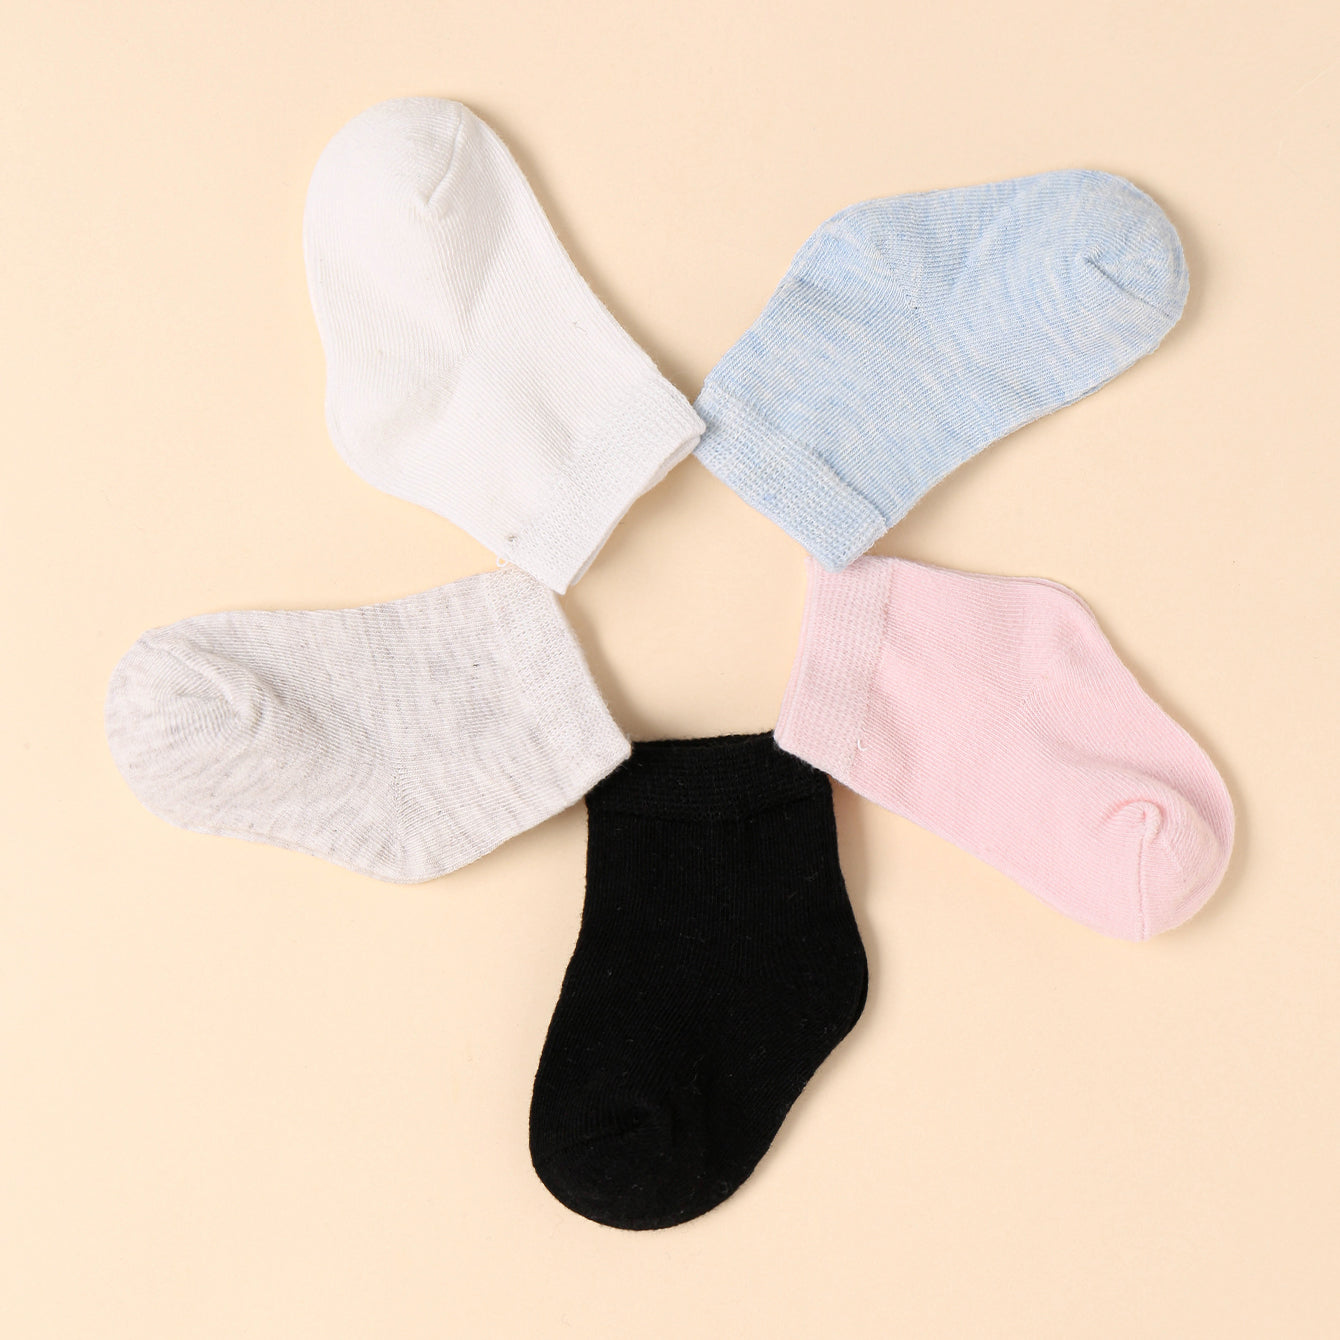 5-pairs 100% Cotton Baby Solid Socks